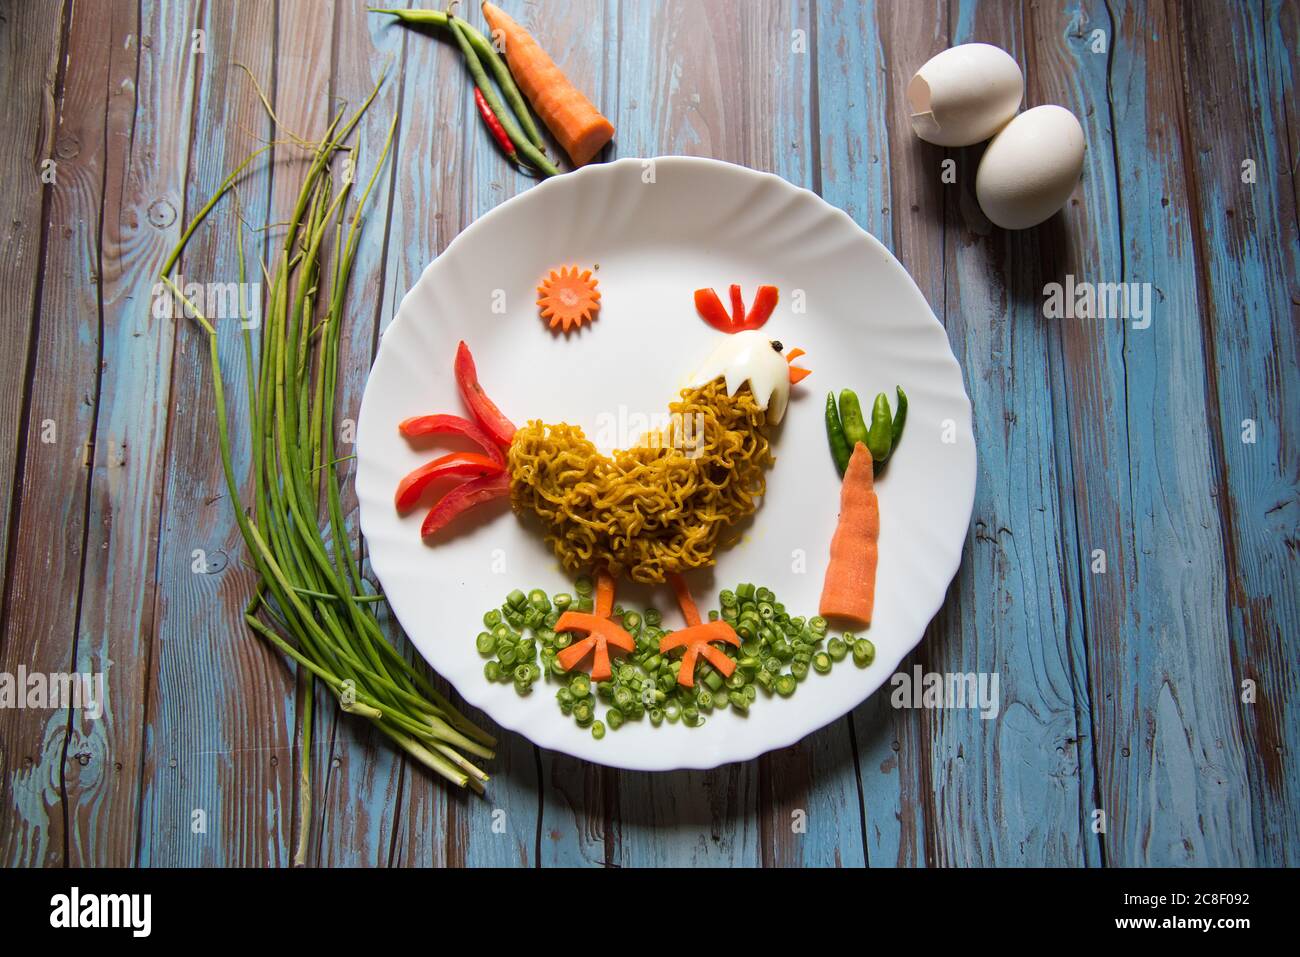 Food art on a background with noodles, vegetables, eggs in the form of rooster on a plate with use of selective focus. Stock Photo